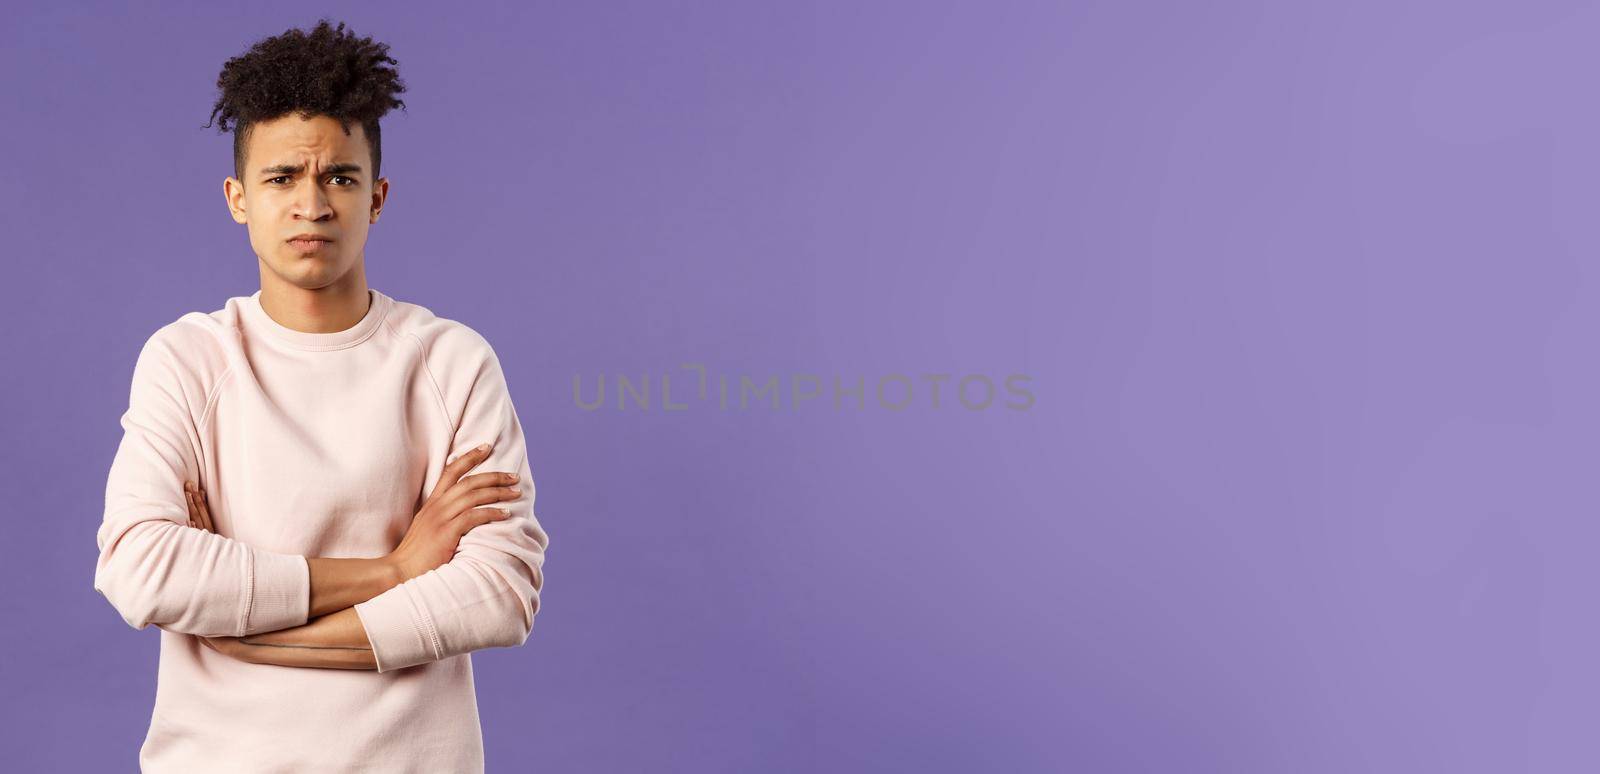 Portrait of young offended hispanic boyfriend, frowning and looking judgemental upset at camera, cross hands over chest defensive insulted pose, standing purple background angry at someone.